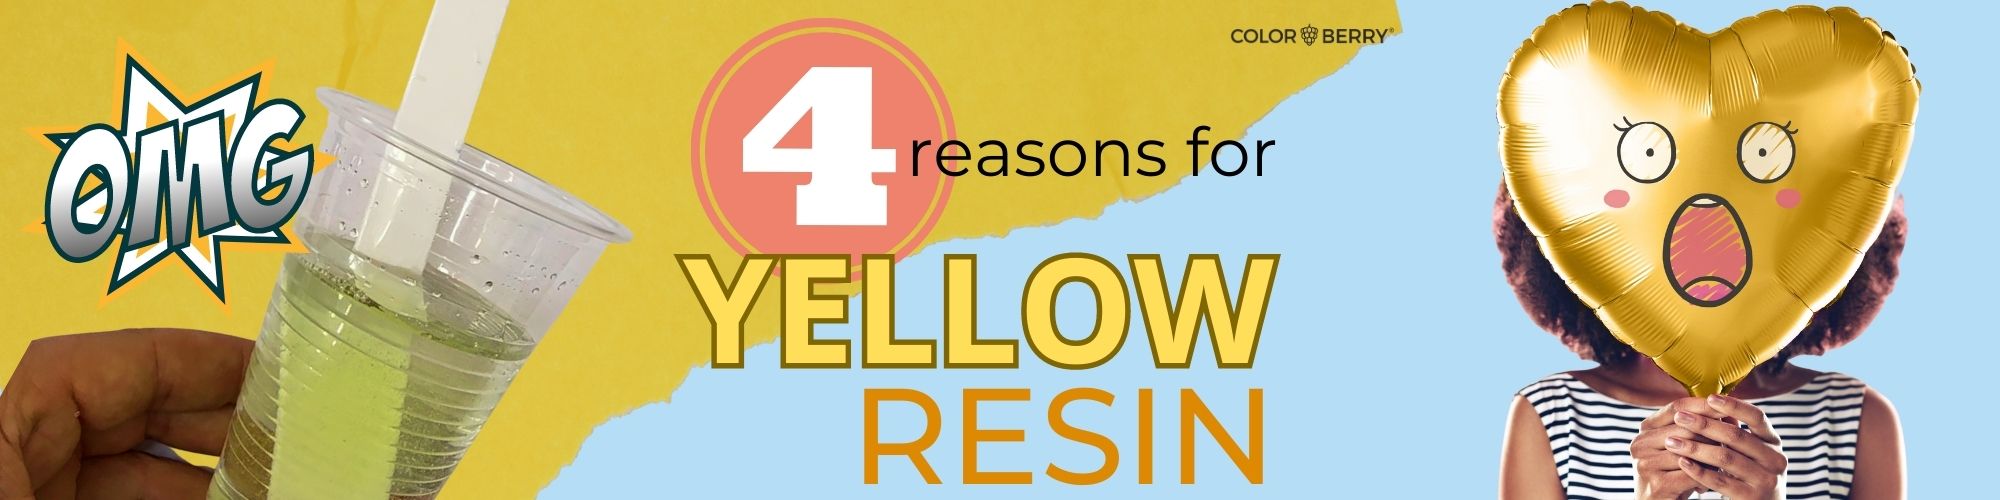 WHY RESIN GETS YELLOW? Is there a solution for it?